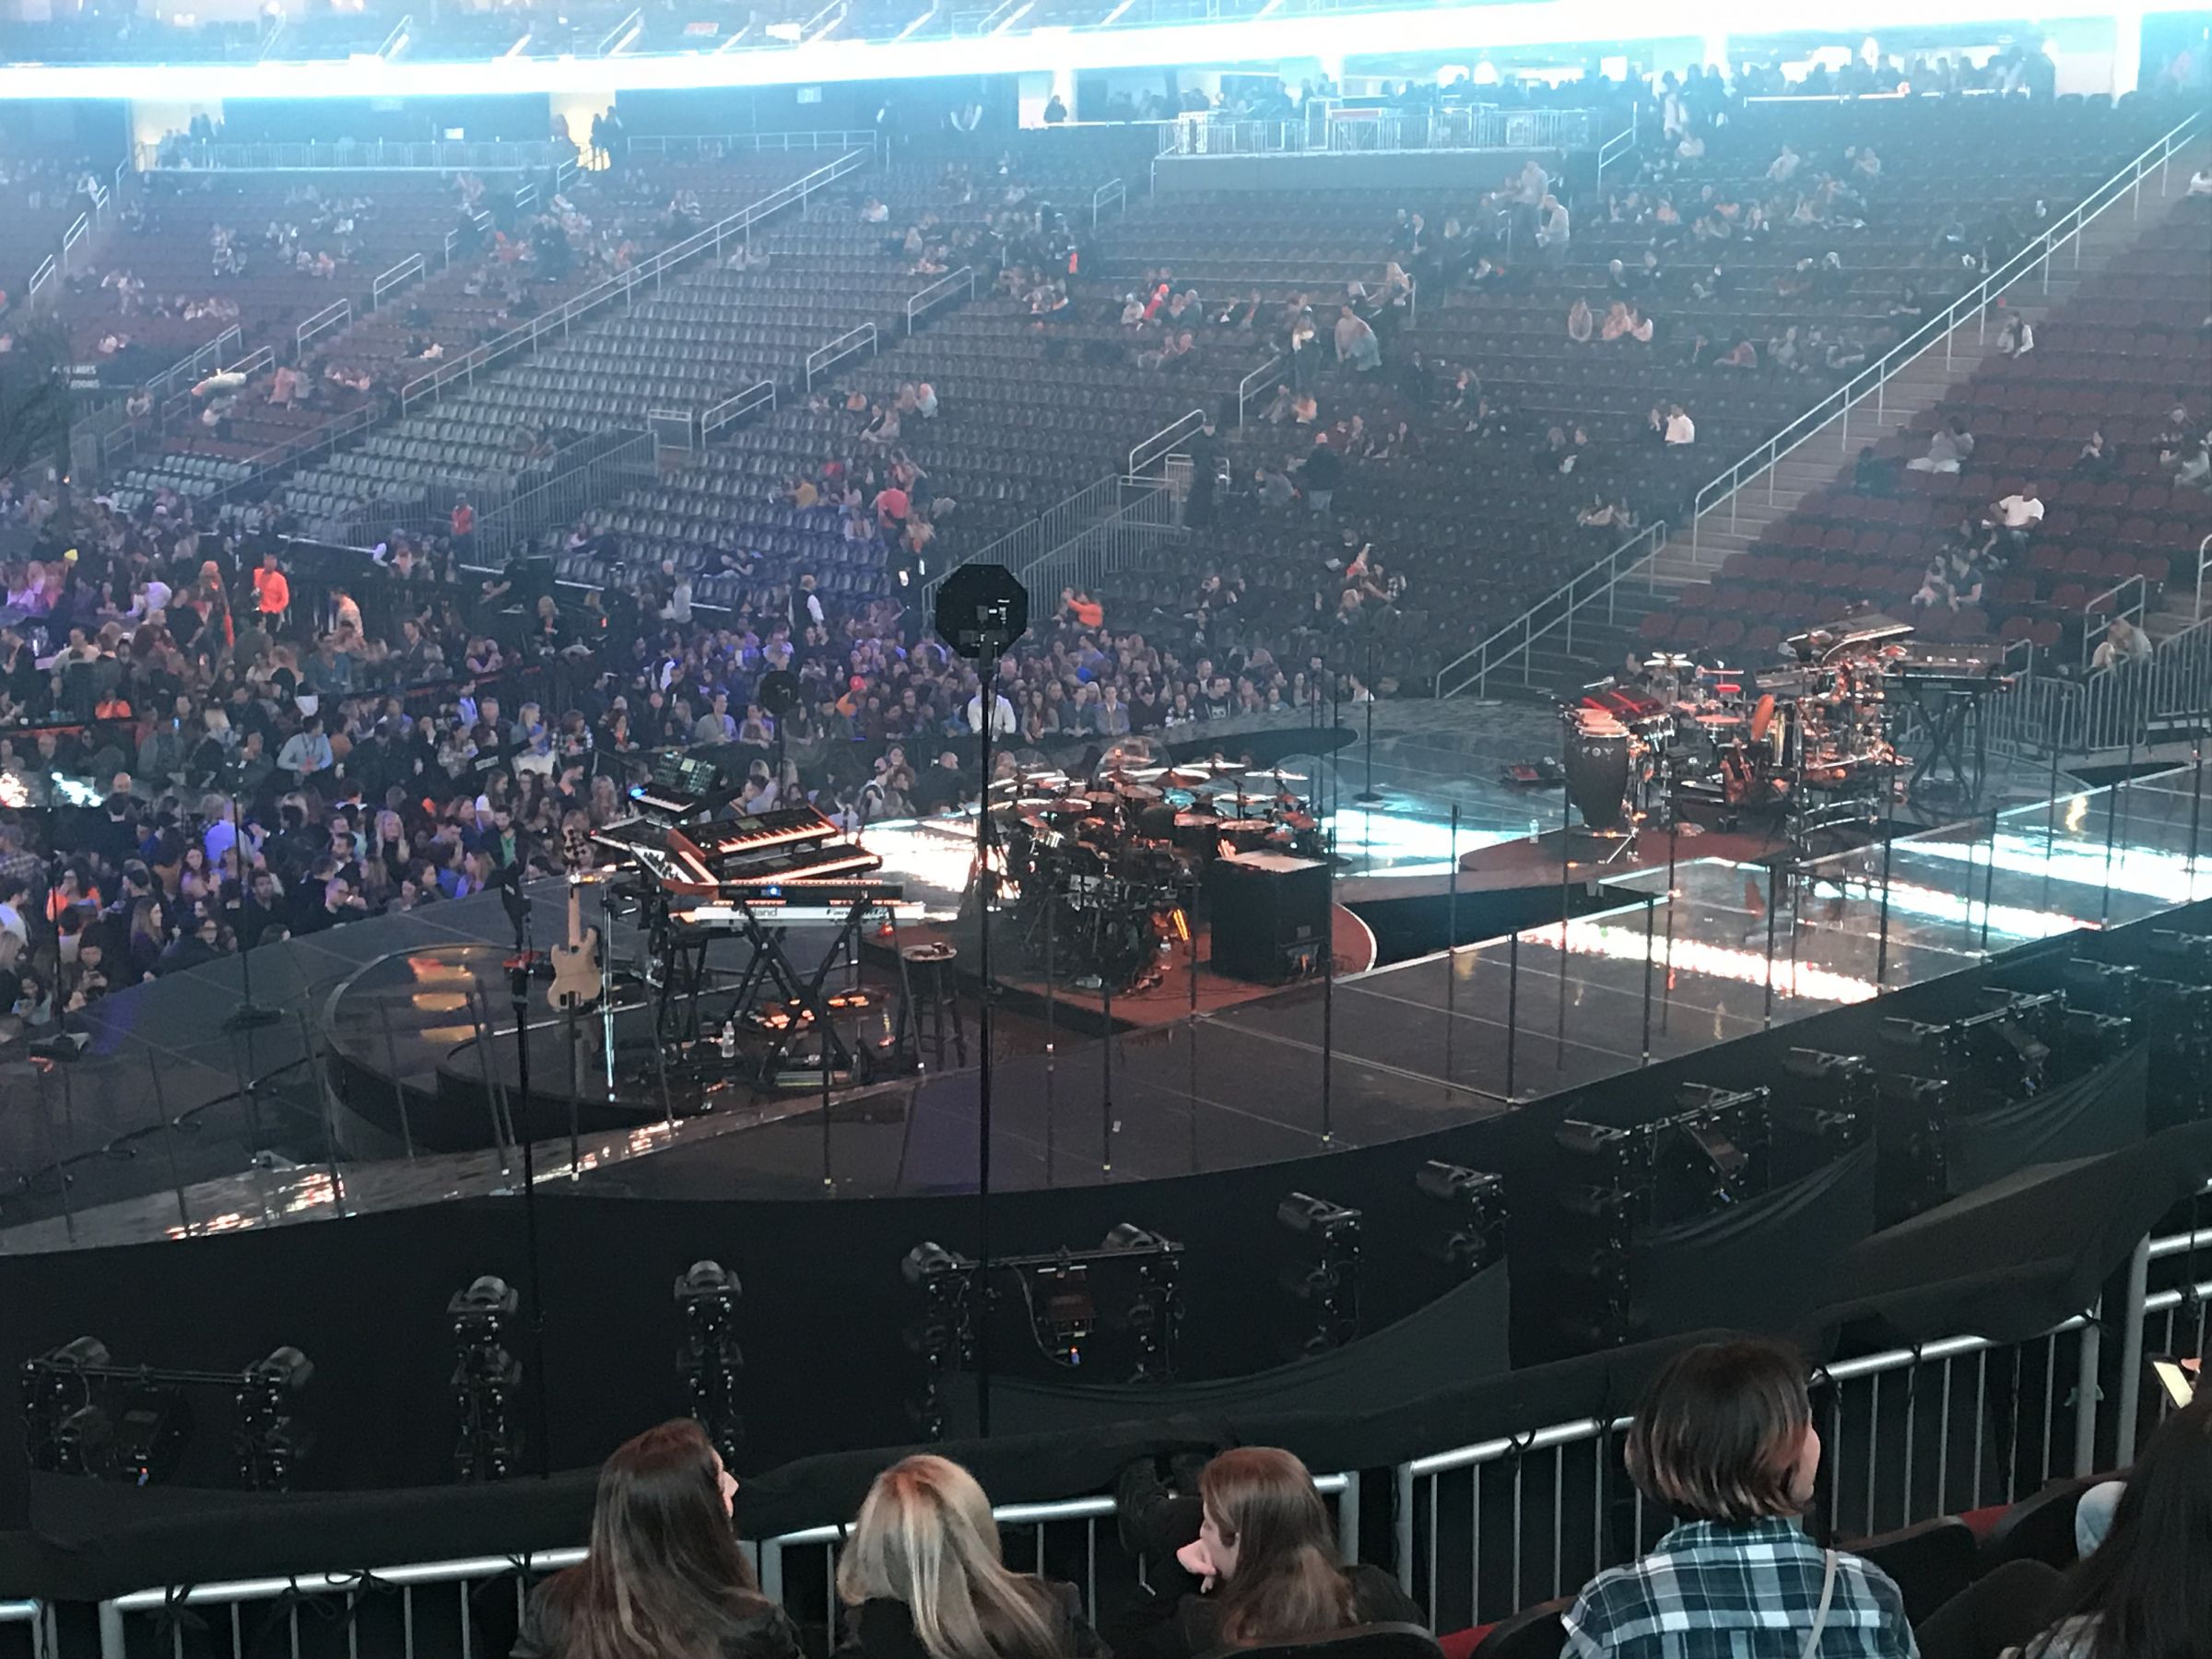 section 12, row 19 seat view  for concert - prudential center